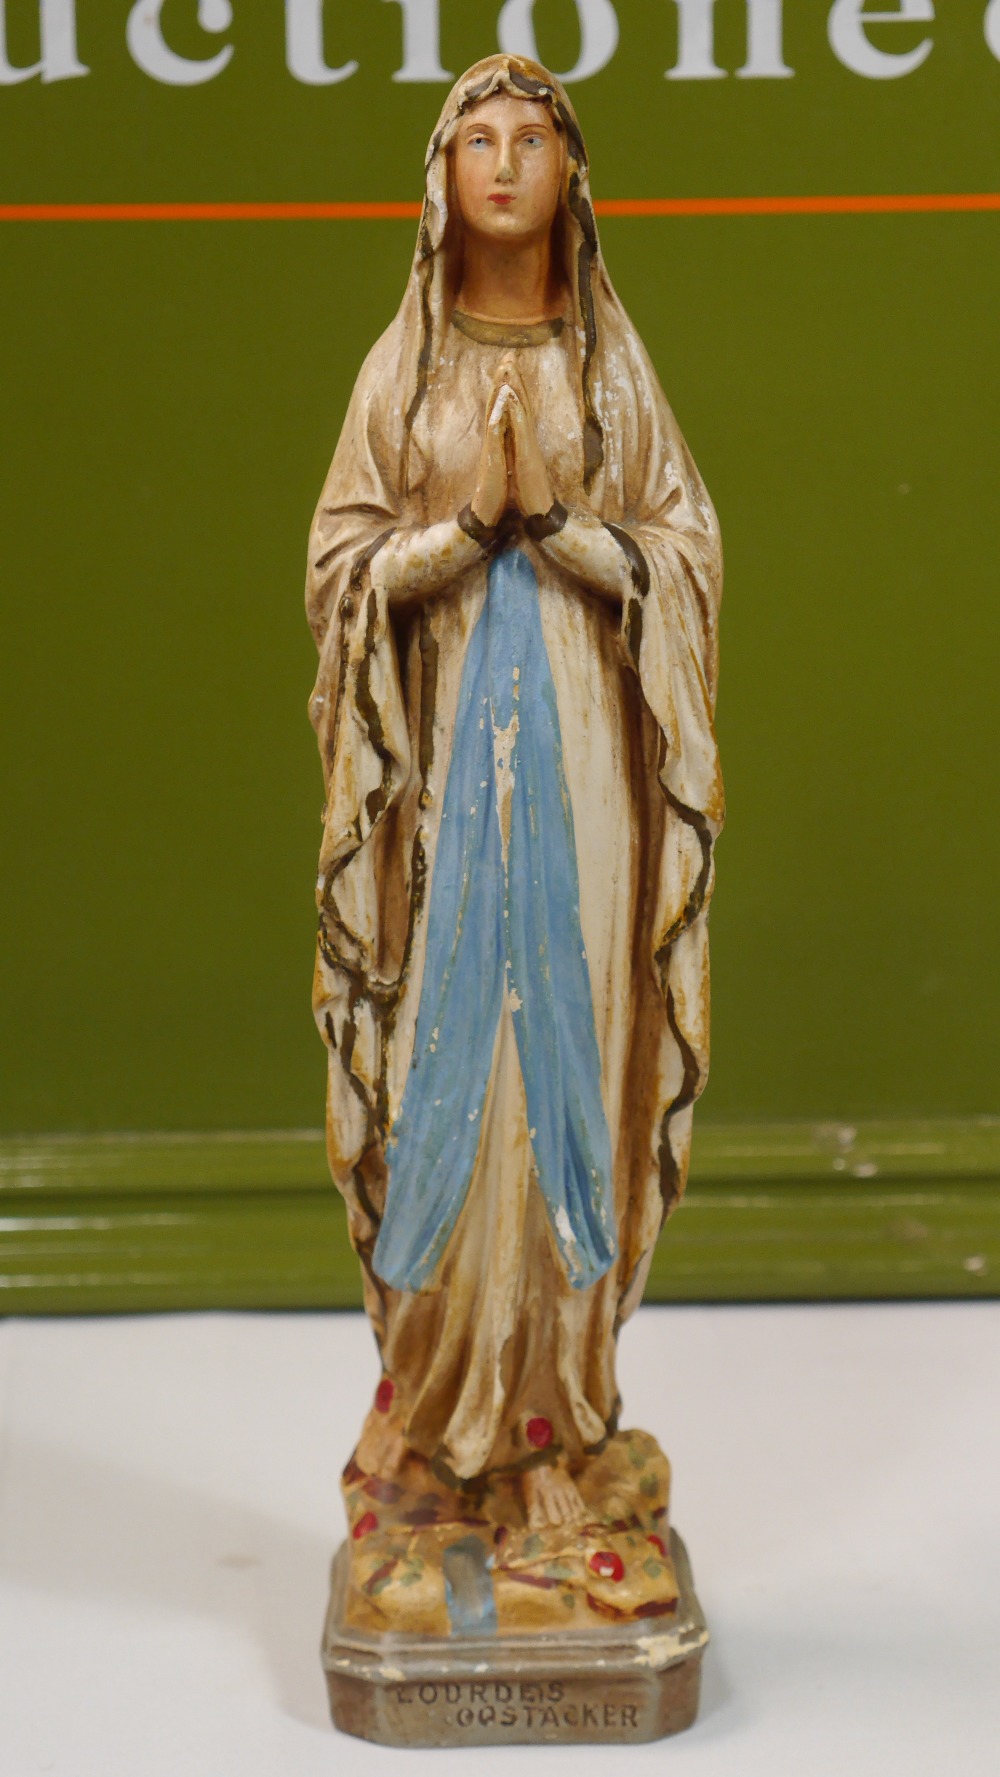 Virgin Mary Our Lady of Lourdes Oostakker Bisque Porcelain Religious Statue - Image 2 of 7